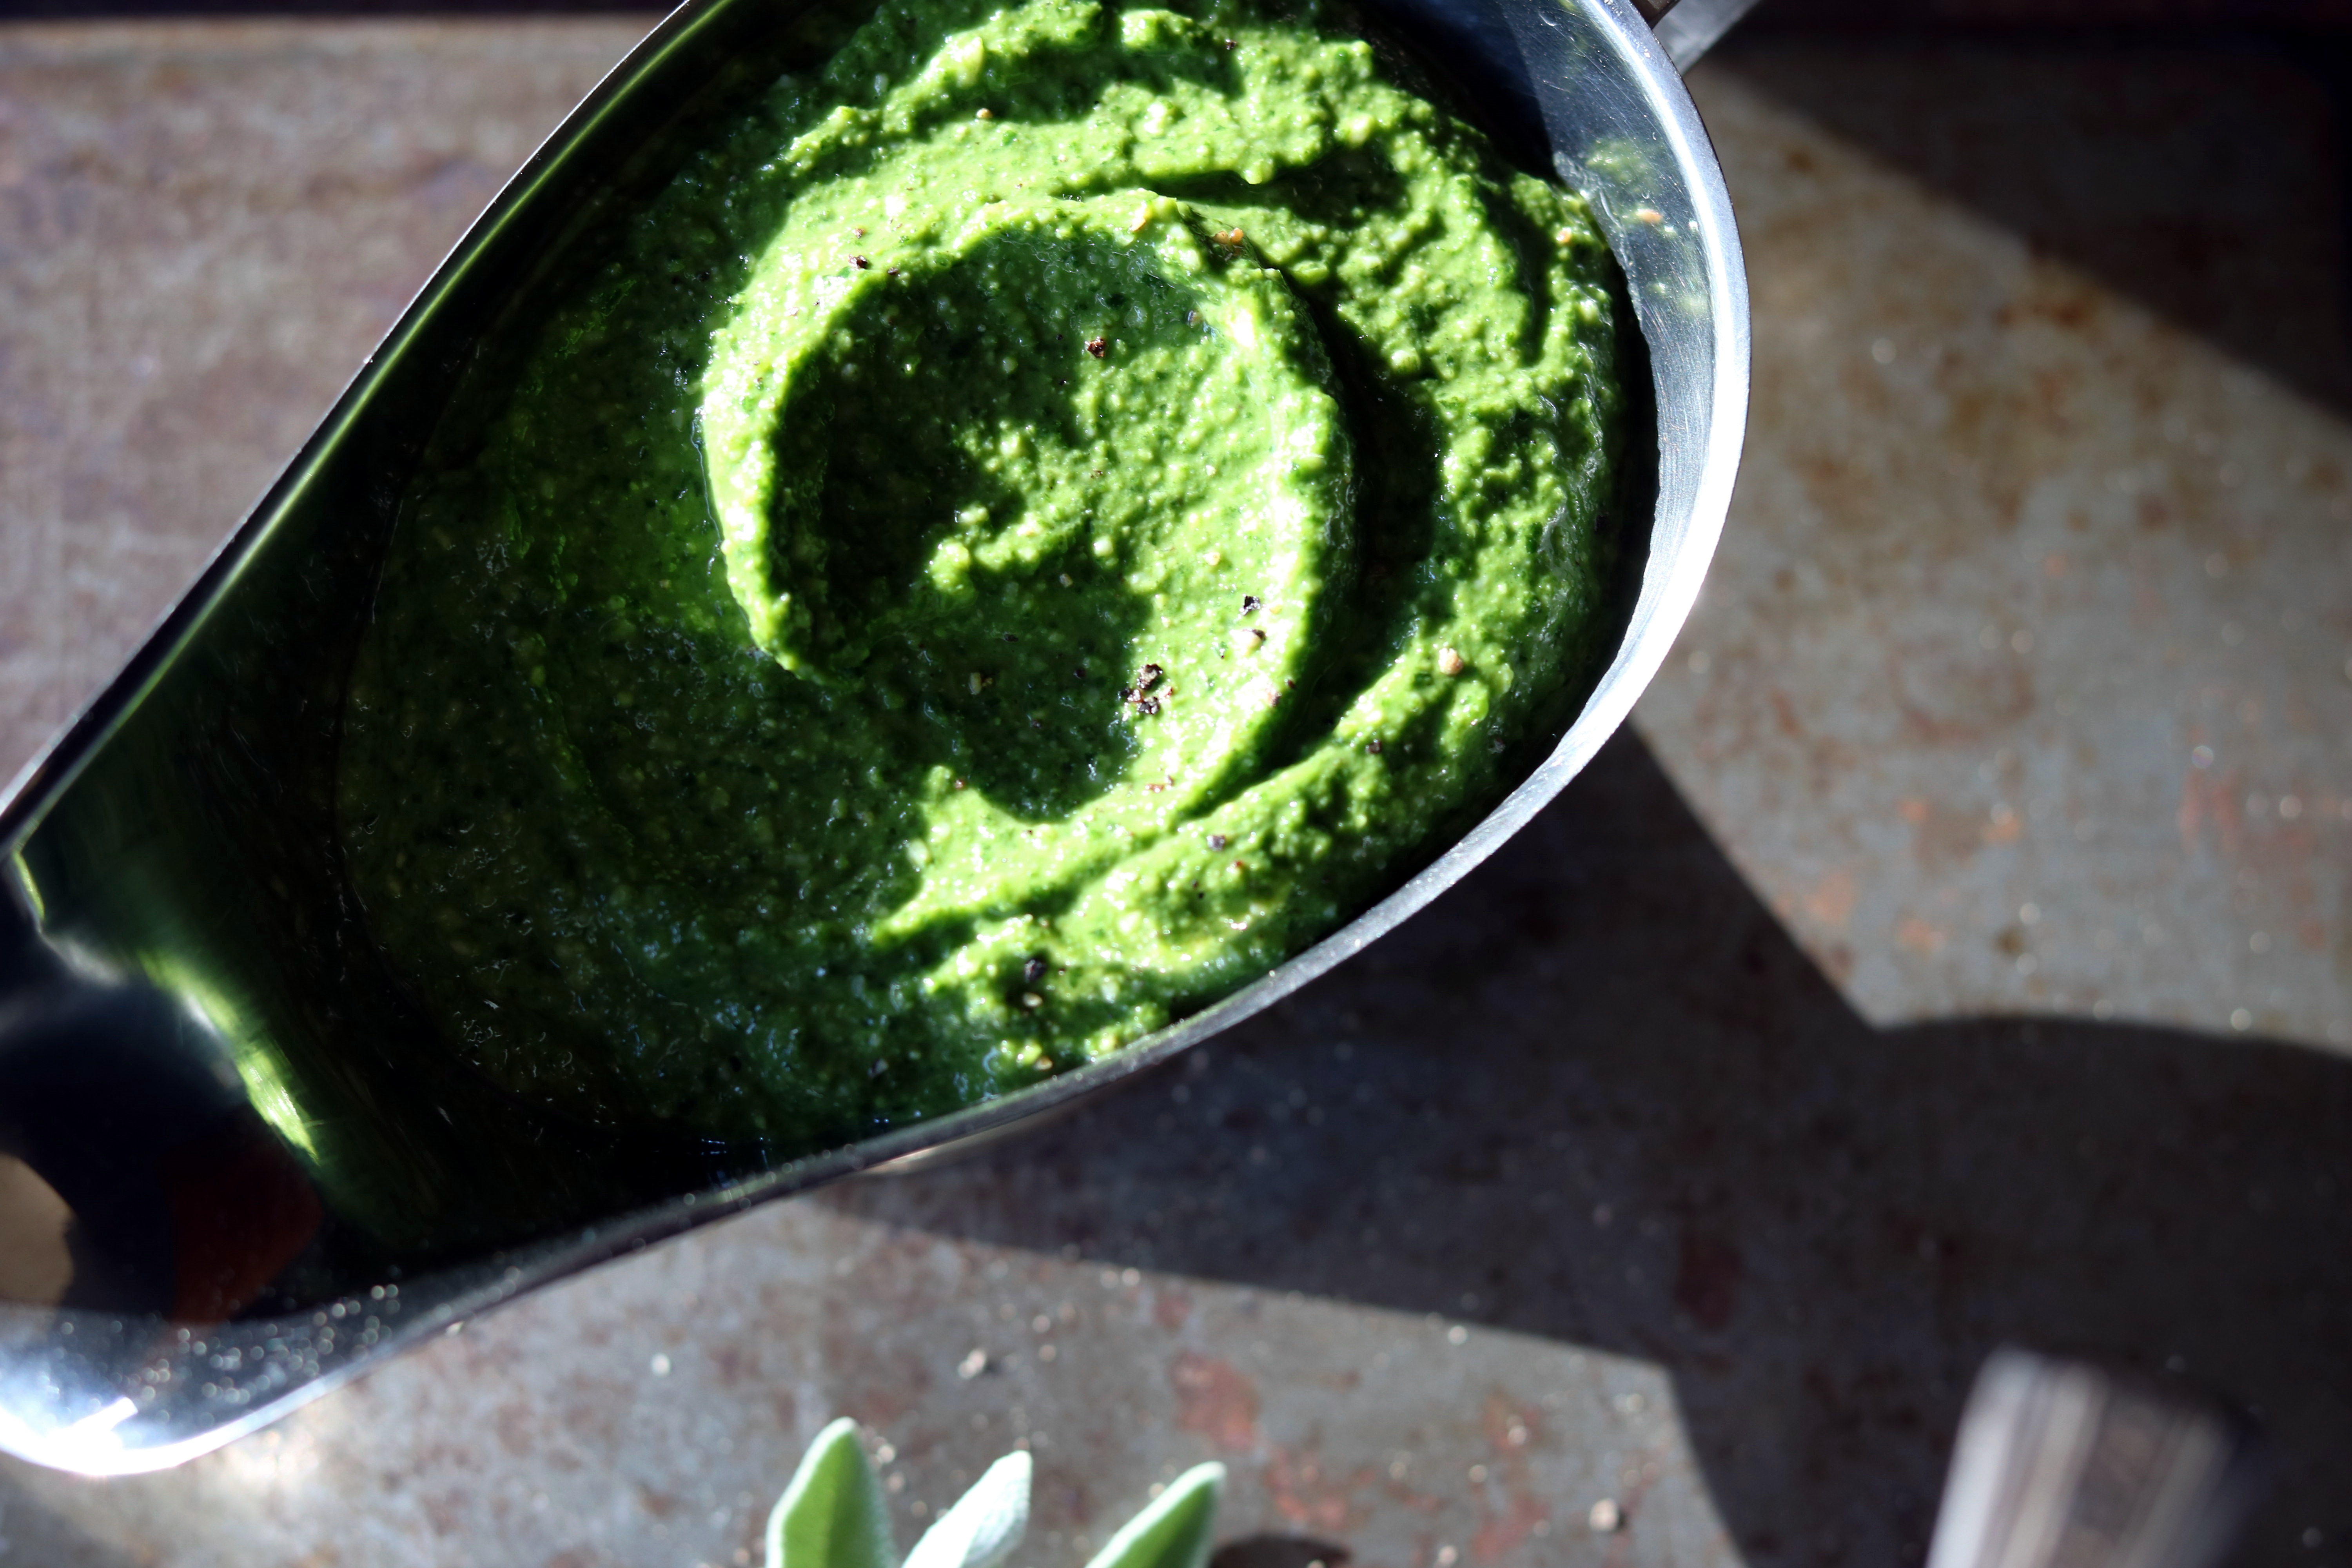 The perfect topping for soup, pasta, grilled vegetables, chicken, fish... the list is endless. Light and a little spicy, this is my families favorite recipe for arugula pesto and it tastes great with this creamy potato and cauliflower soup!